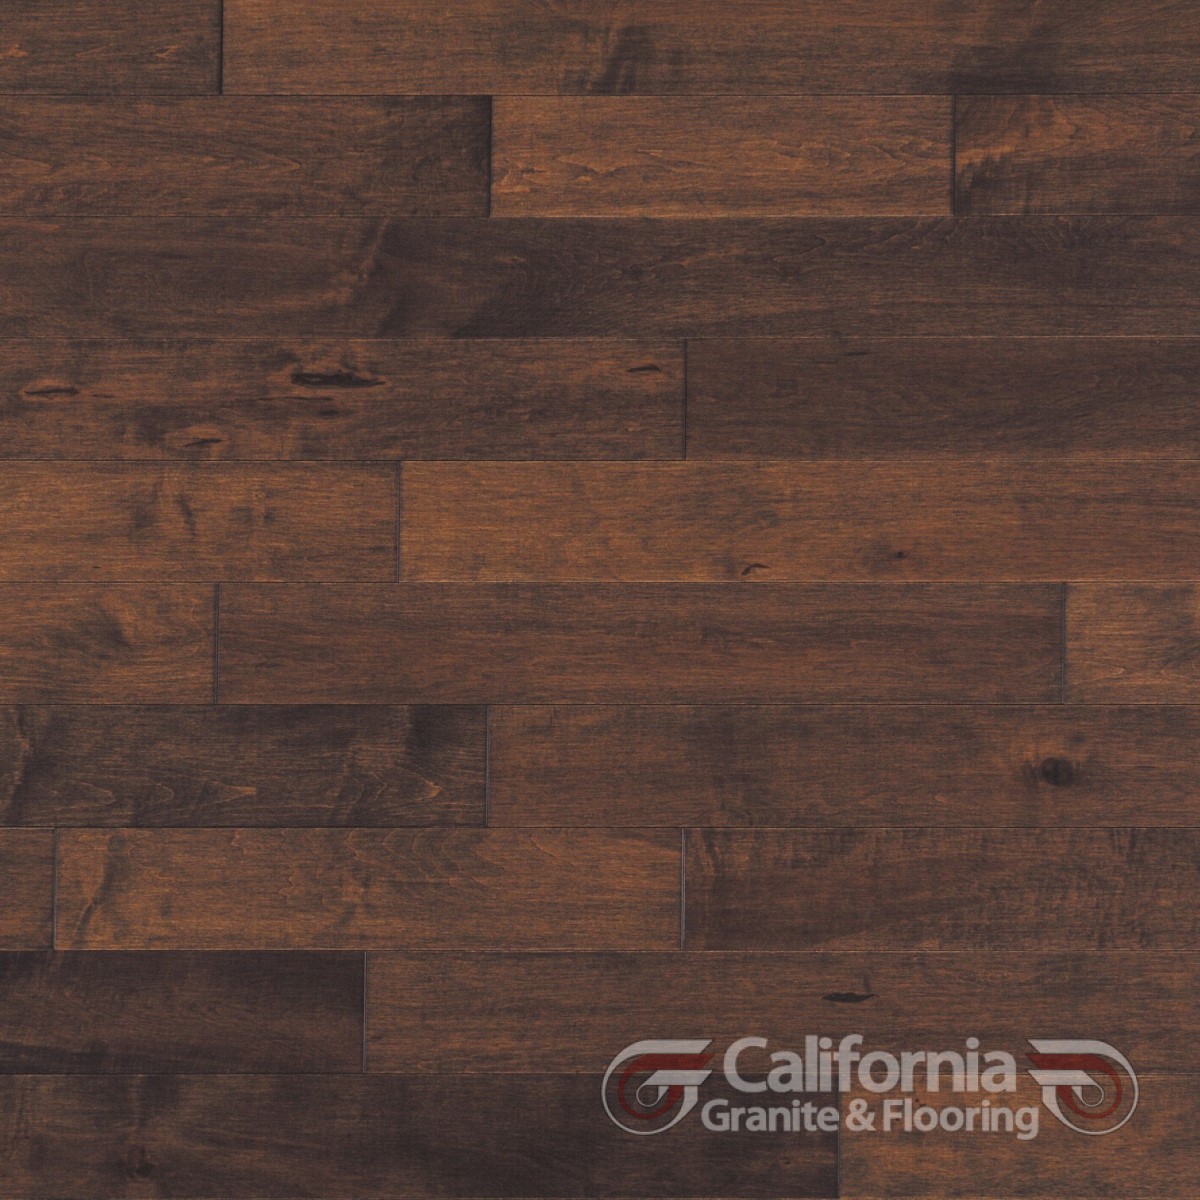 Maple Gingerbread Character Smooth California Granite and Flooring